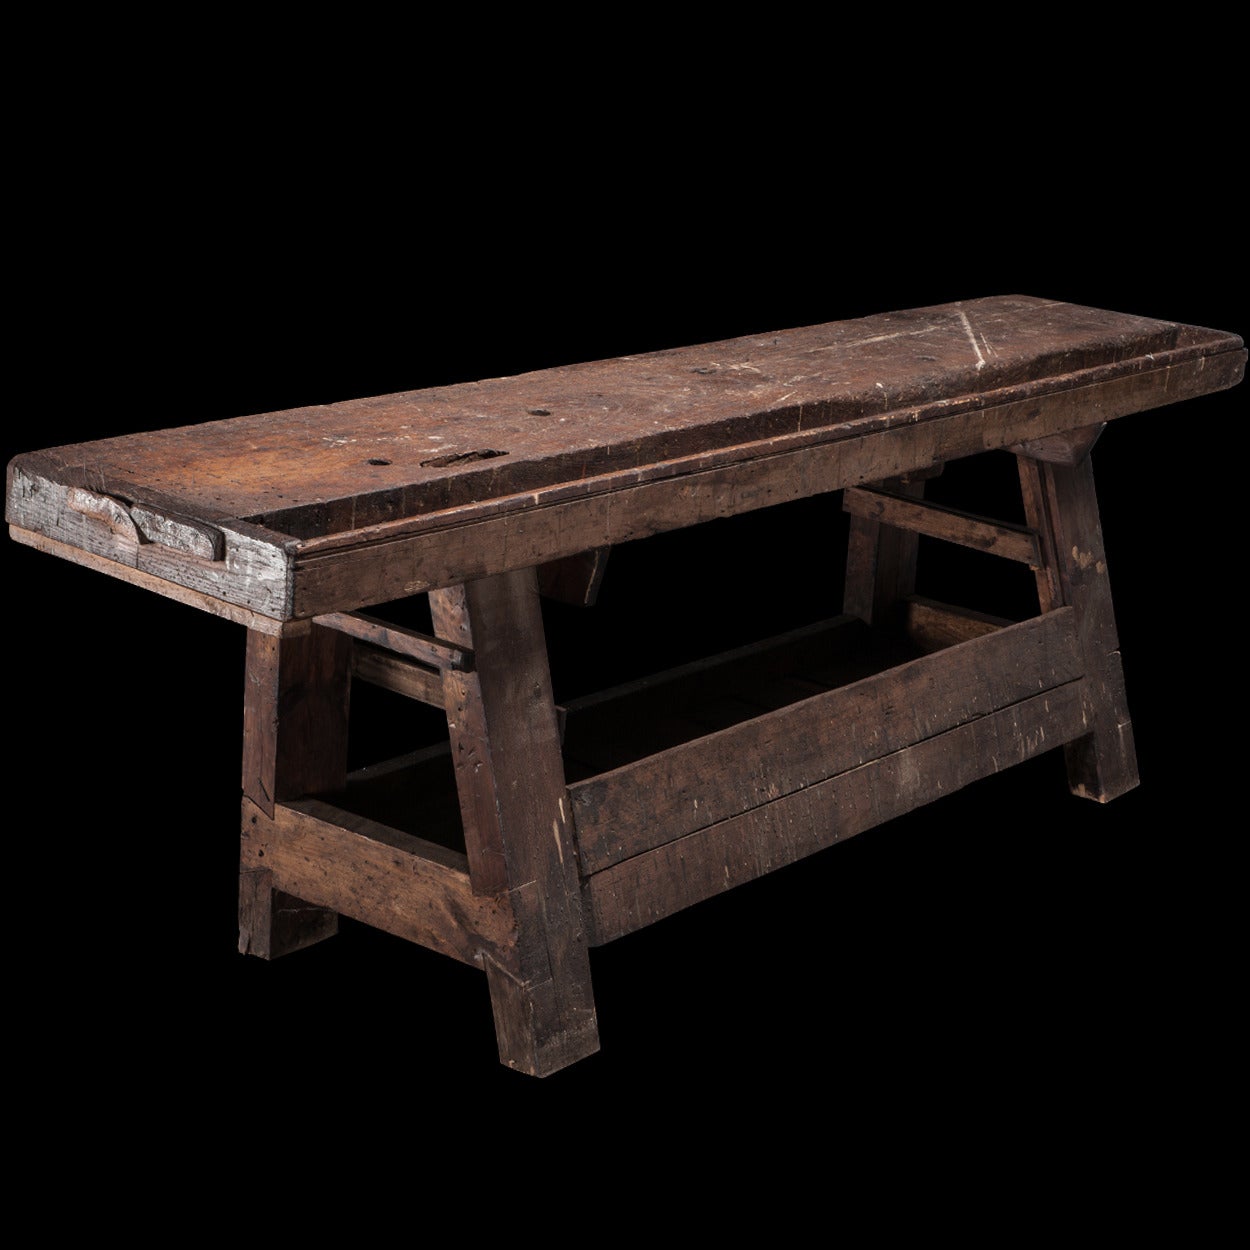 Solid pine workbench, with beautiful patina and original paint splatters.

Made in France circa 1870.